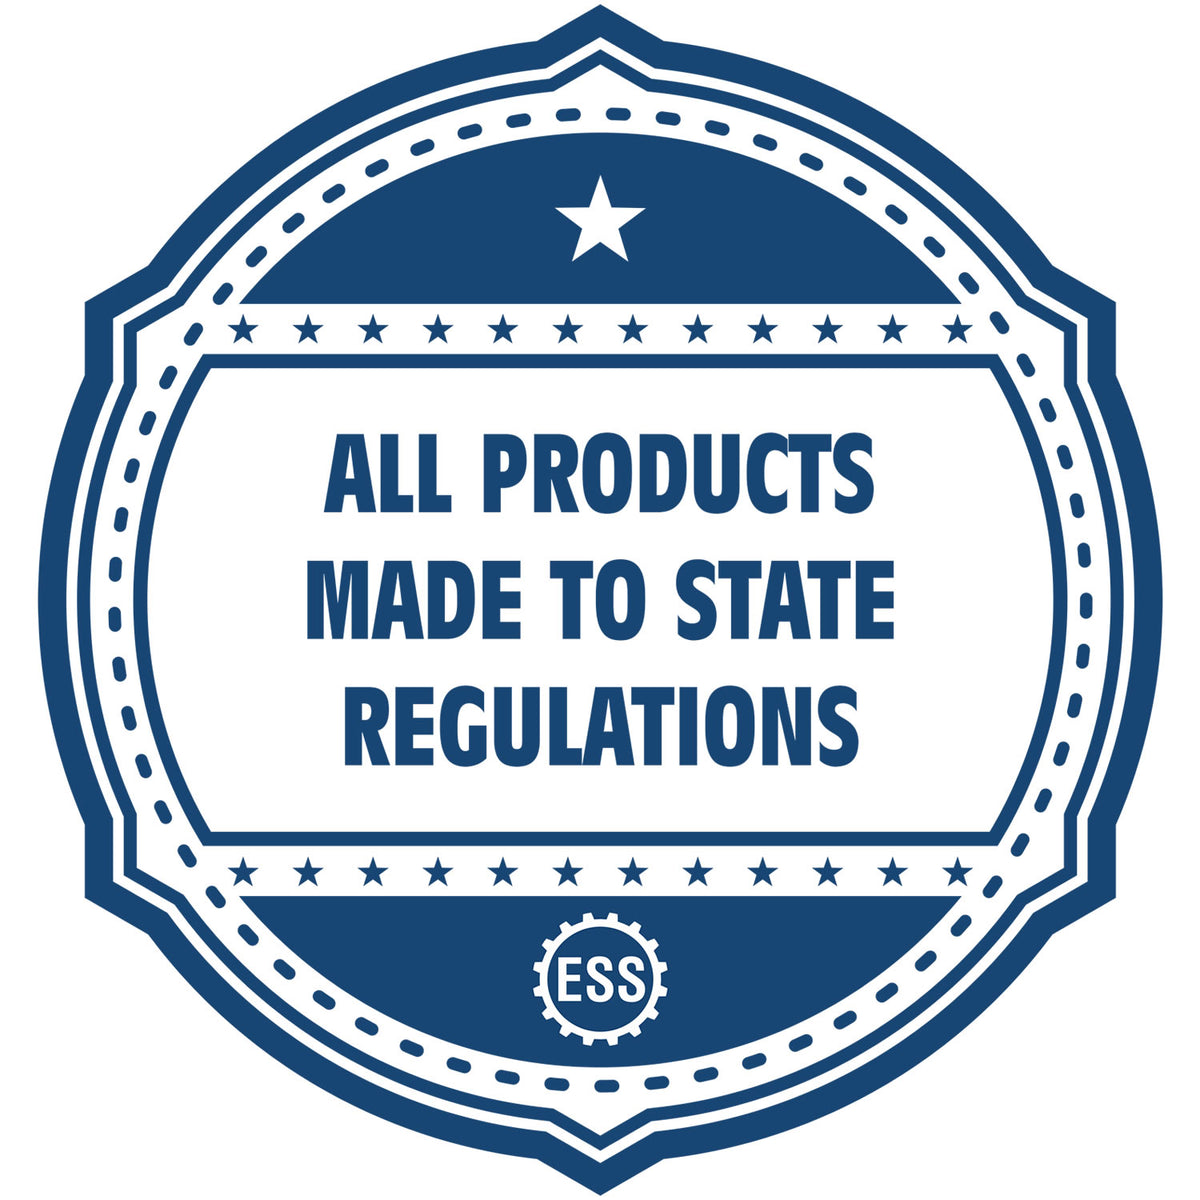 A blue icon or badge for the Heavy Duty Cast Iron Kentucky Geologist Seal Embosser showing that this product is made in compliance with state regulations.